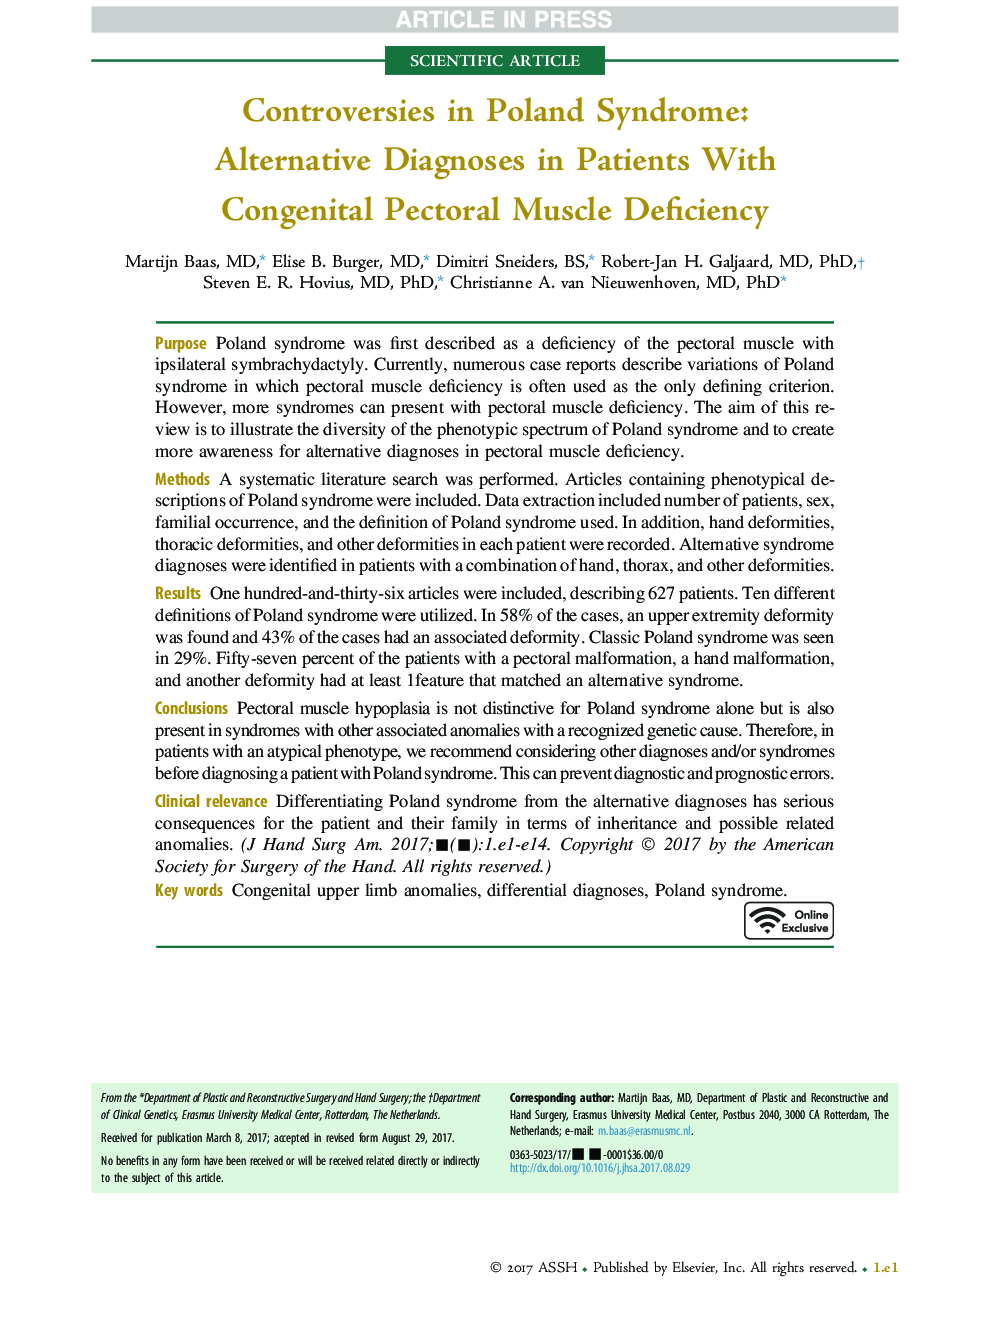 Controversies in Poland Syndrome: Alternative Diagnoses in Patients With Congenital Pectoral Muscle Deficiency